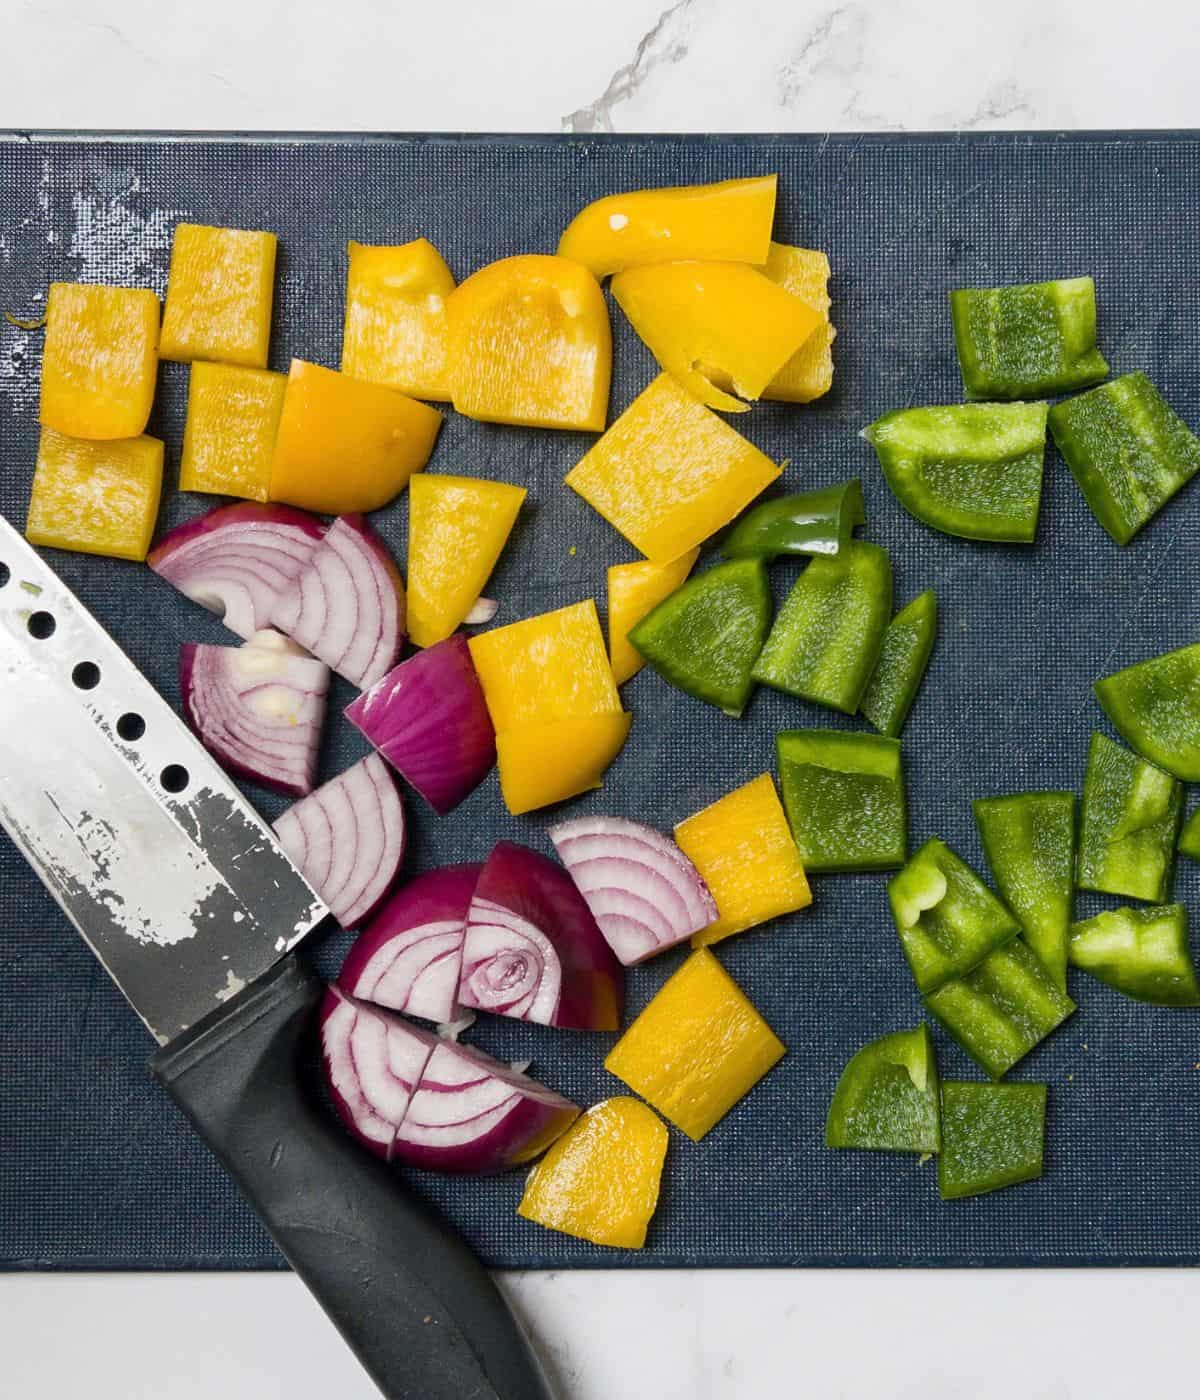 Chopped green and yellow peppers and red onion on a blue chopping board with a knife.